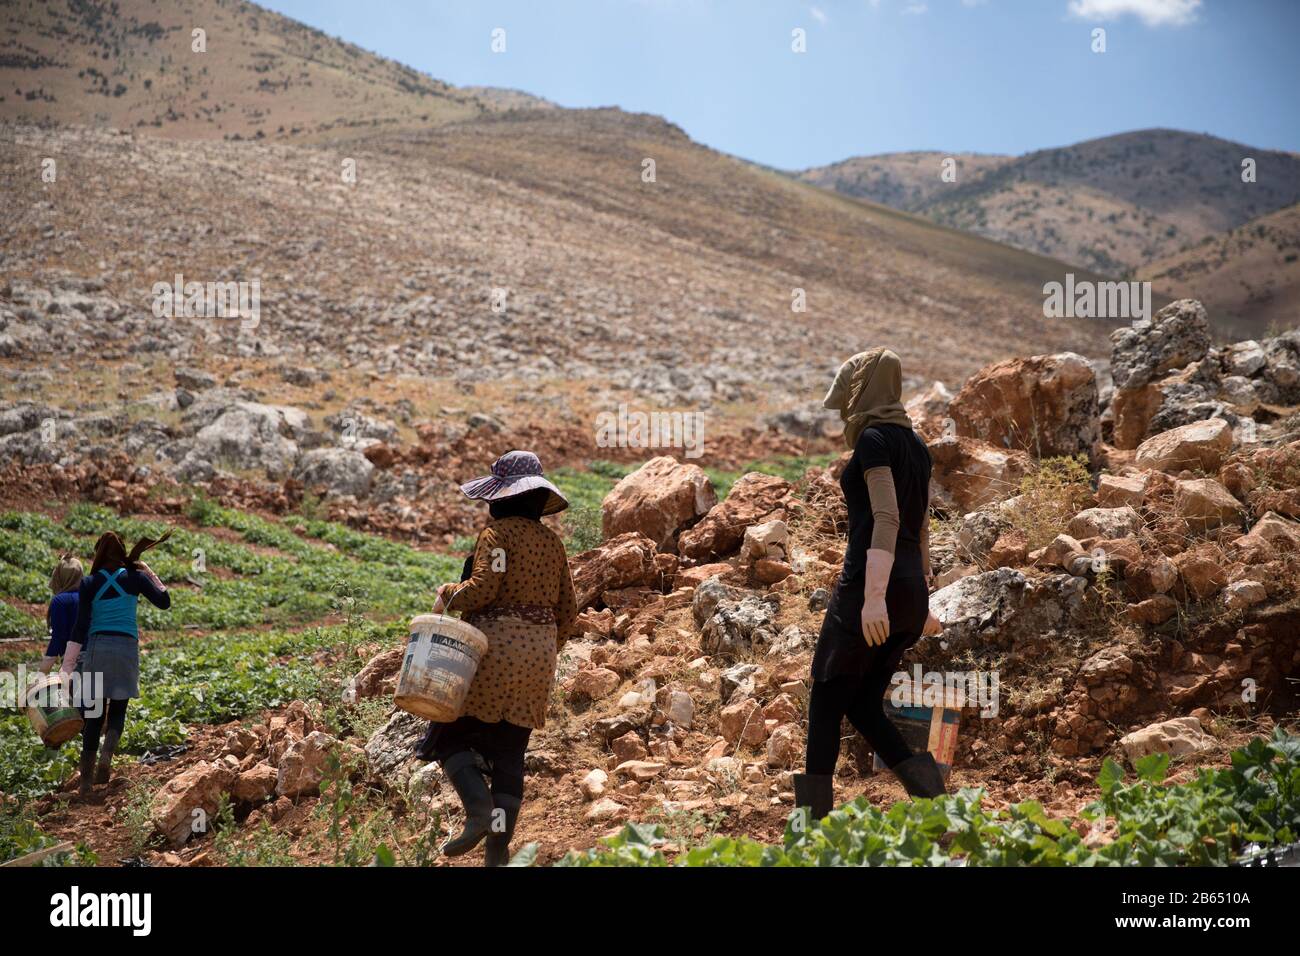 Zahle, Lebanon. 18th July, 2019. A woman caring a bucket at a farm.Syrian refugees fleeing from war work on agricultural farms in the Bekaa Valley for 15 hours a day during summer, earning a maximum of $8. The heads of the camps (Shawish) where they refugee connect them with the region farmers. Credit: Eva Parey/SOPA Images/ZUMA Wire/Alamy Live News Stock Photo